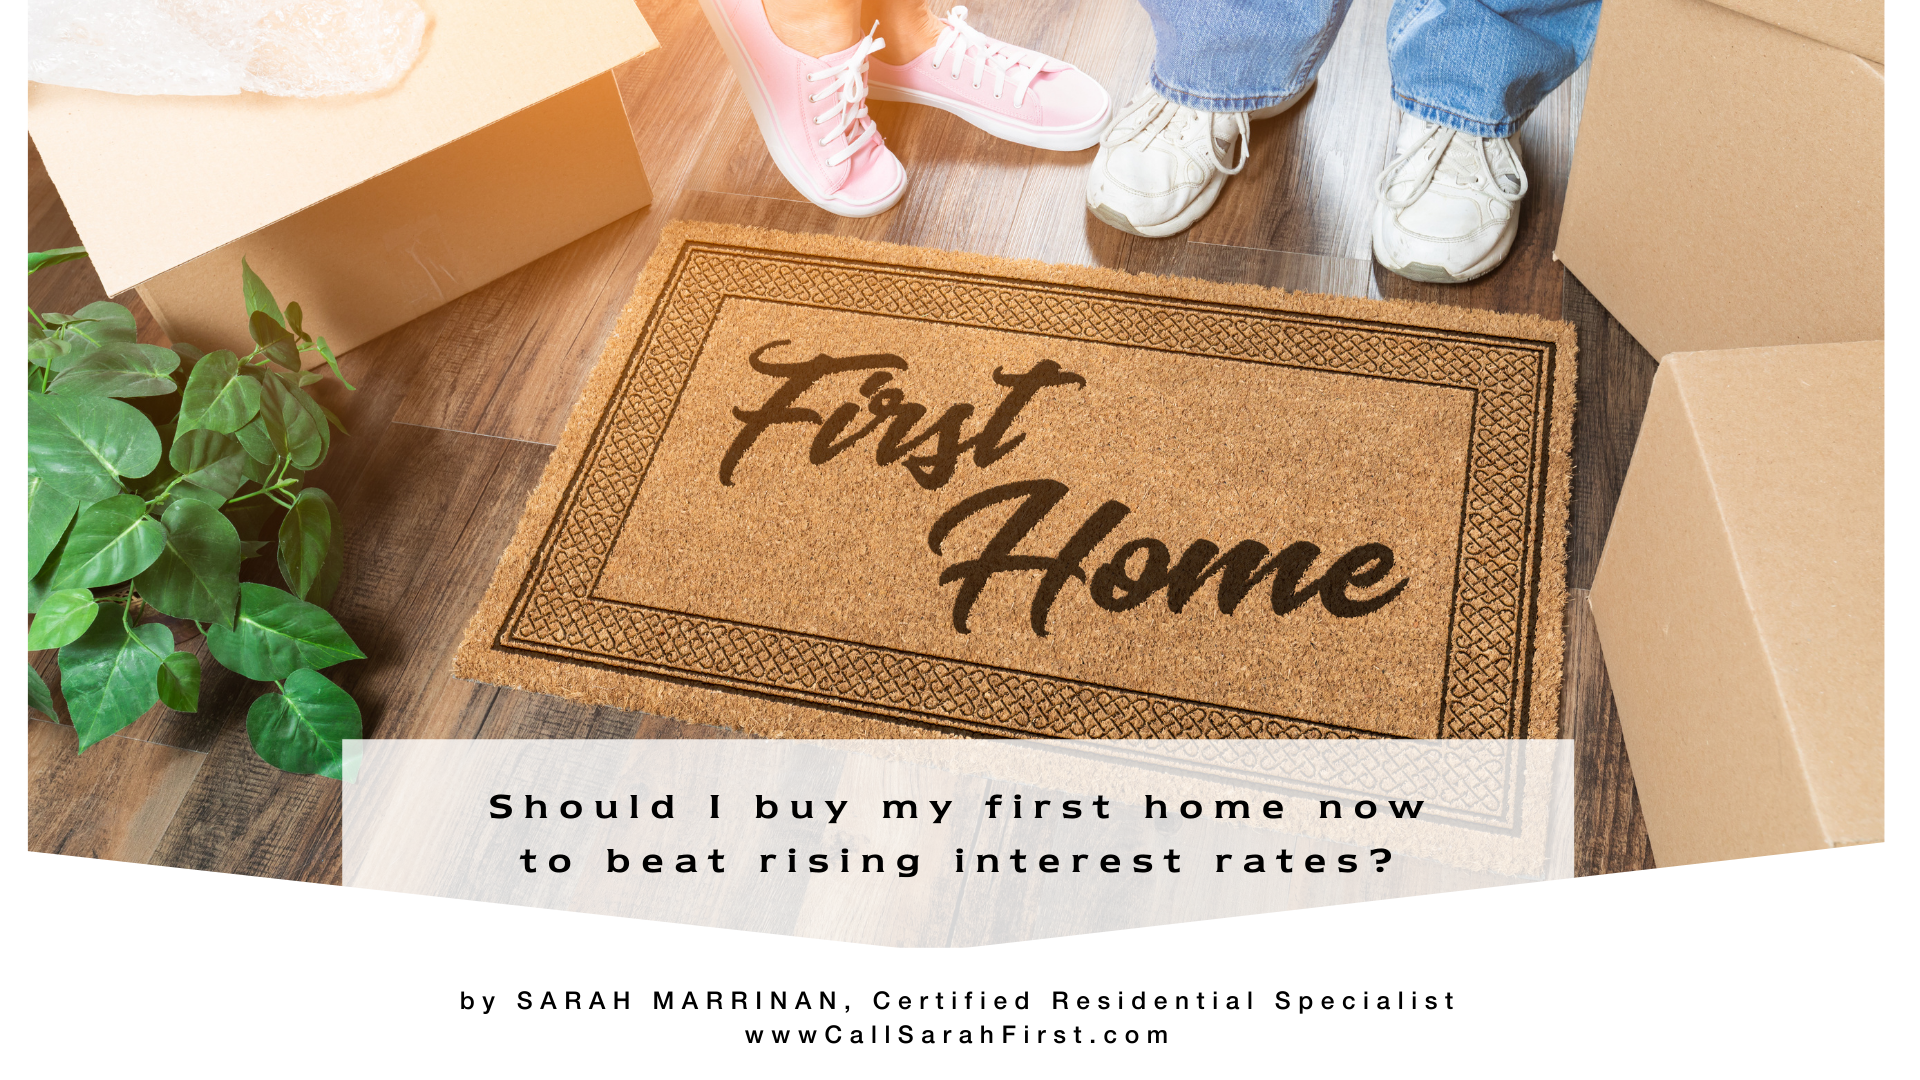 Should I buy my first home now to beat rising interest rates?